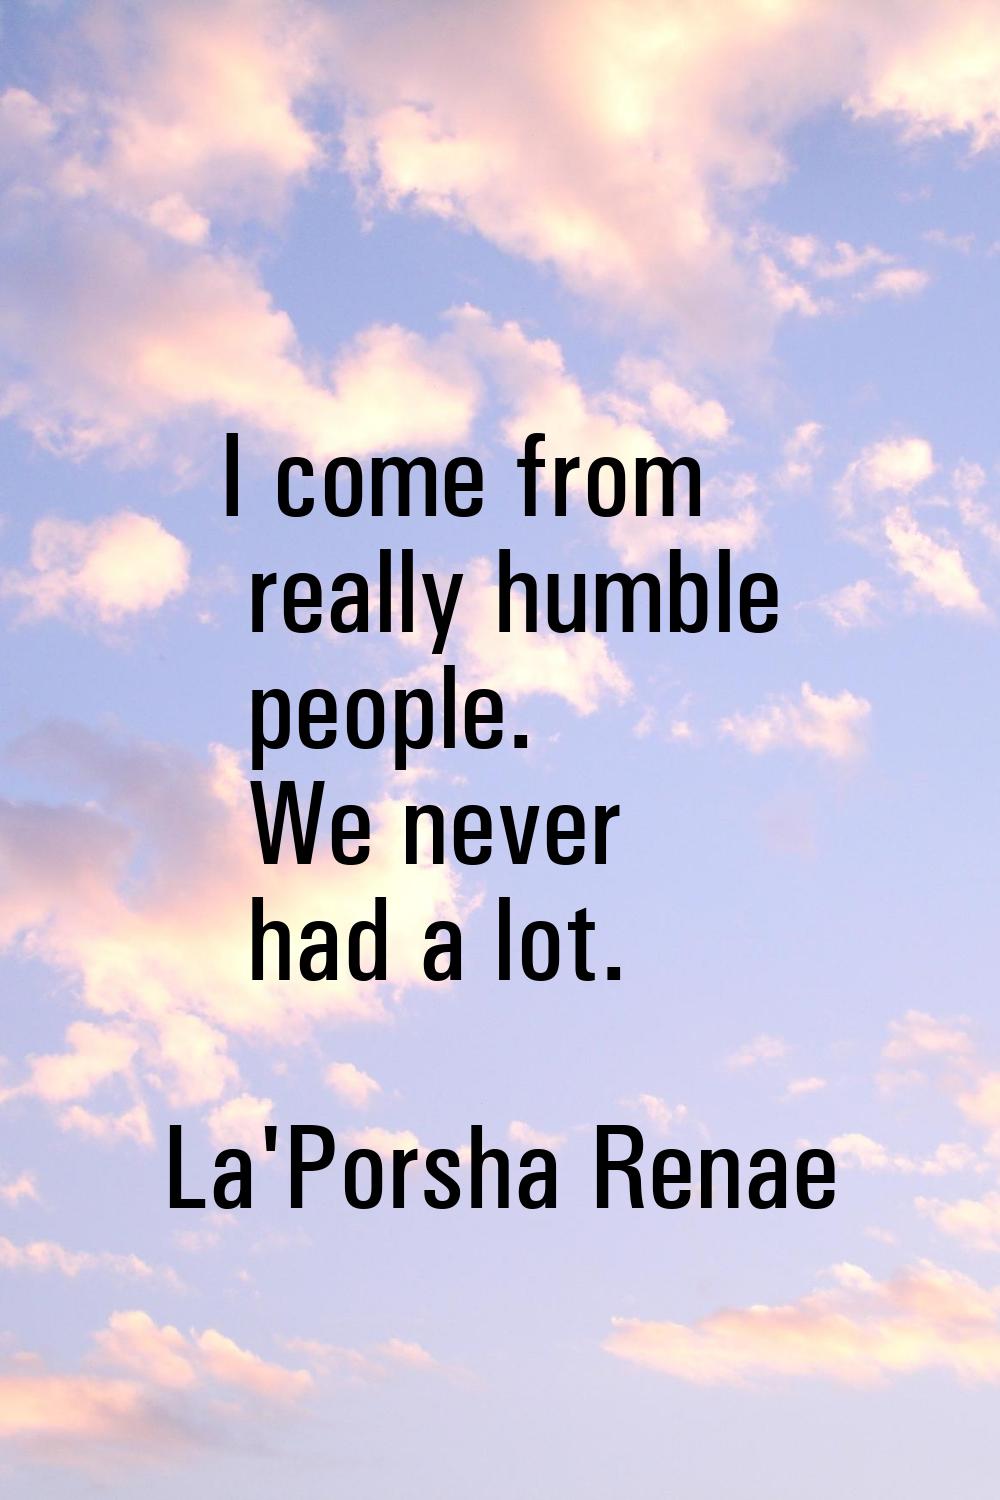 I come from really humble people. We never had a lot.